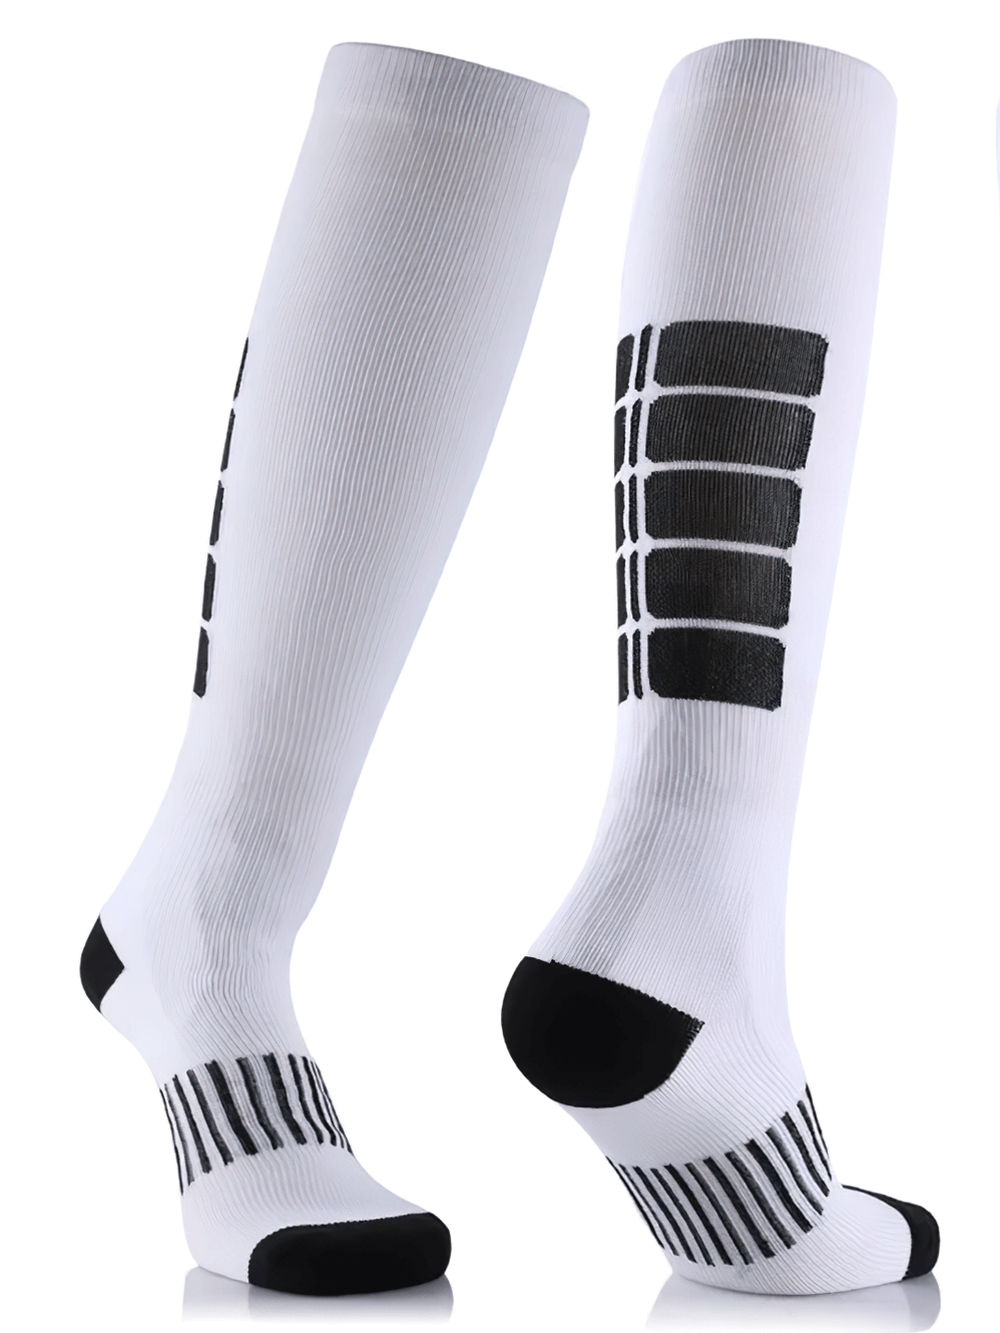 Knee-High Sports Socks for Cycling and Running - SF2238